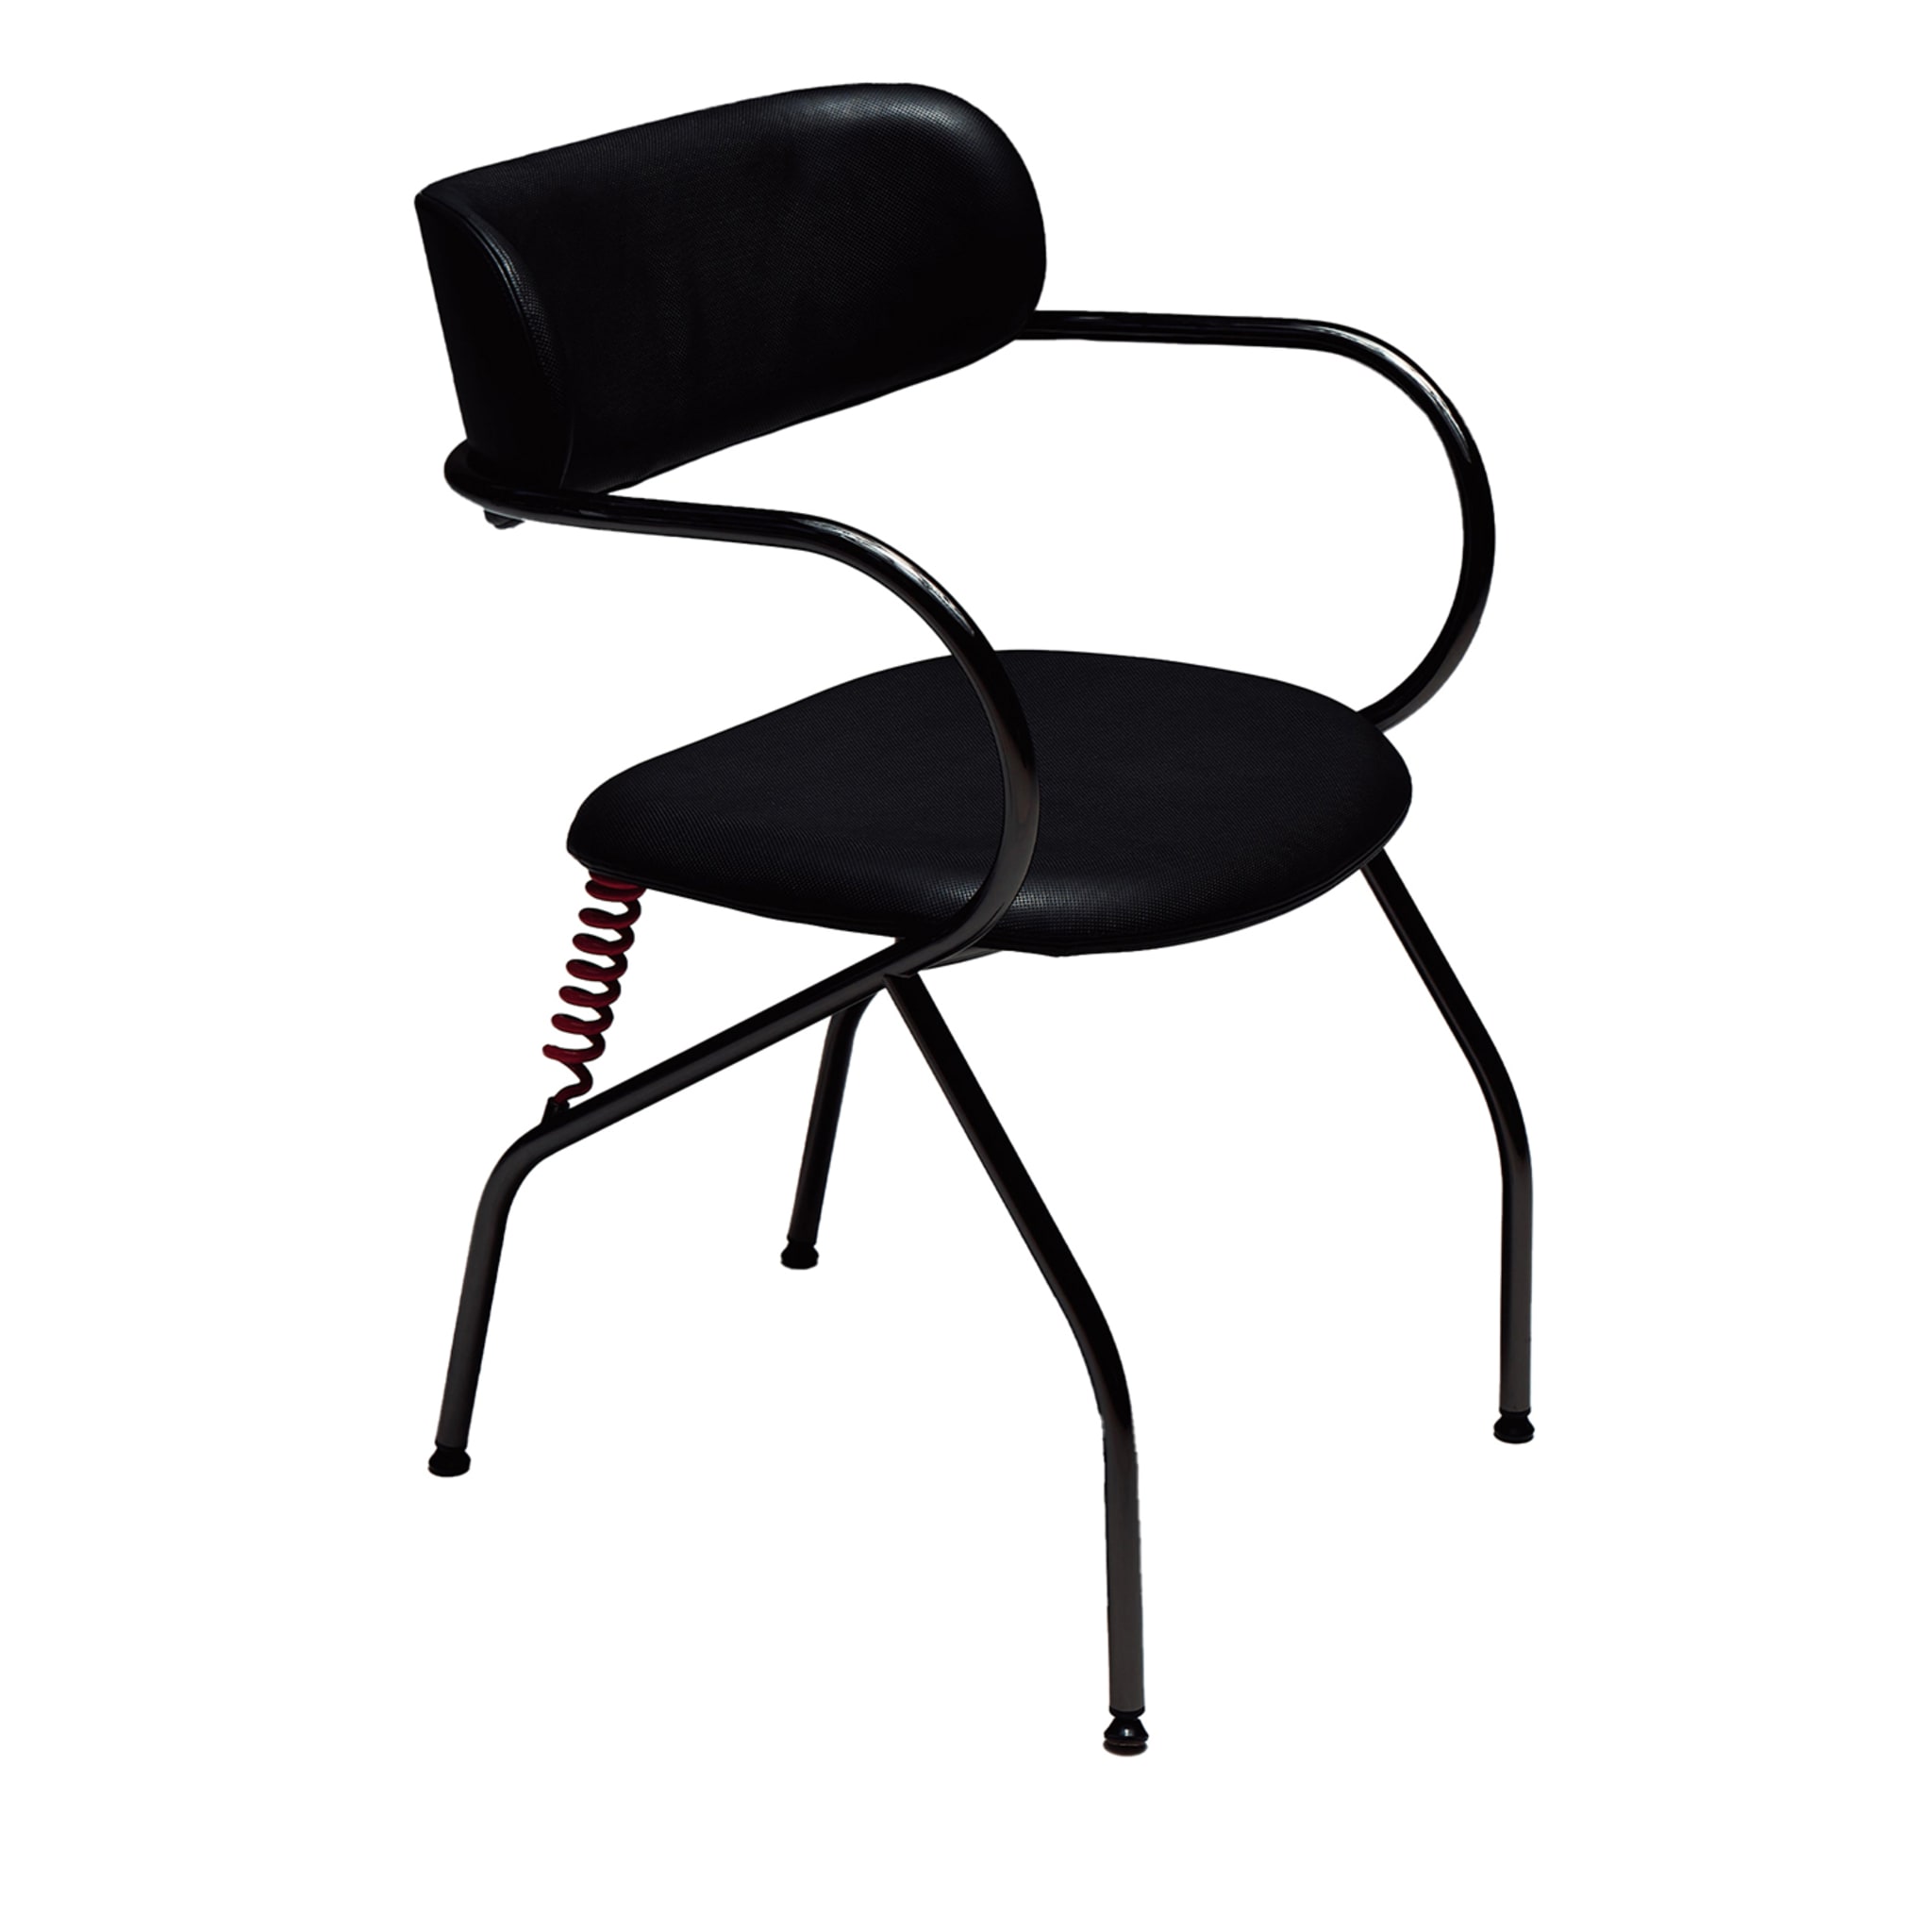 Spring Black Chair by Front - Main view